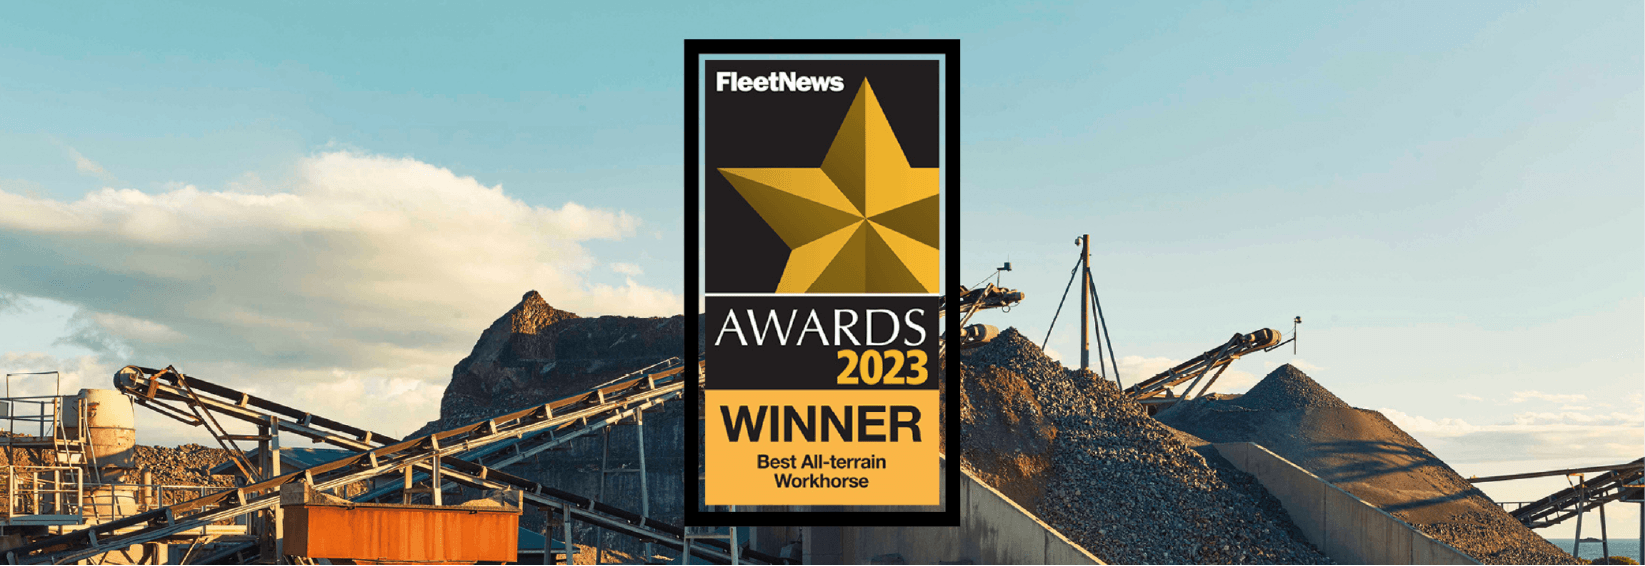 Isuzu D Max Named Best All Terrain Workhorse For The Second Consecutive Year By Fleet News Awards 2023